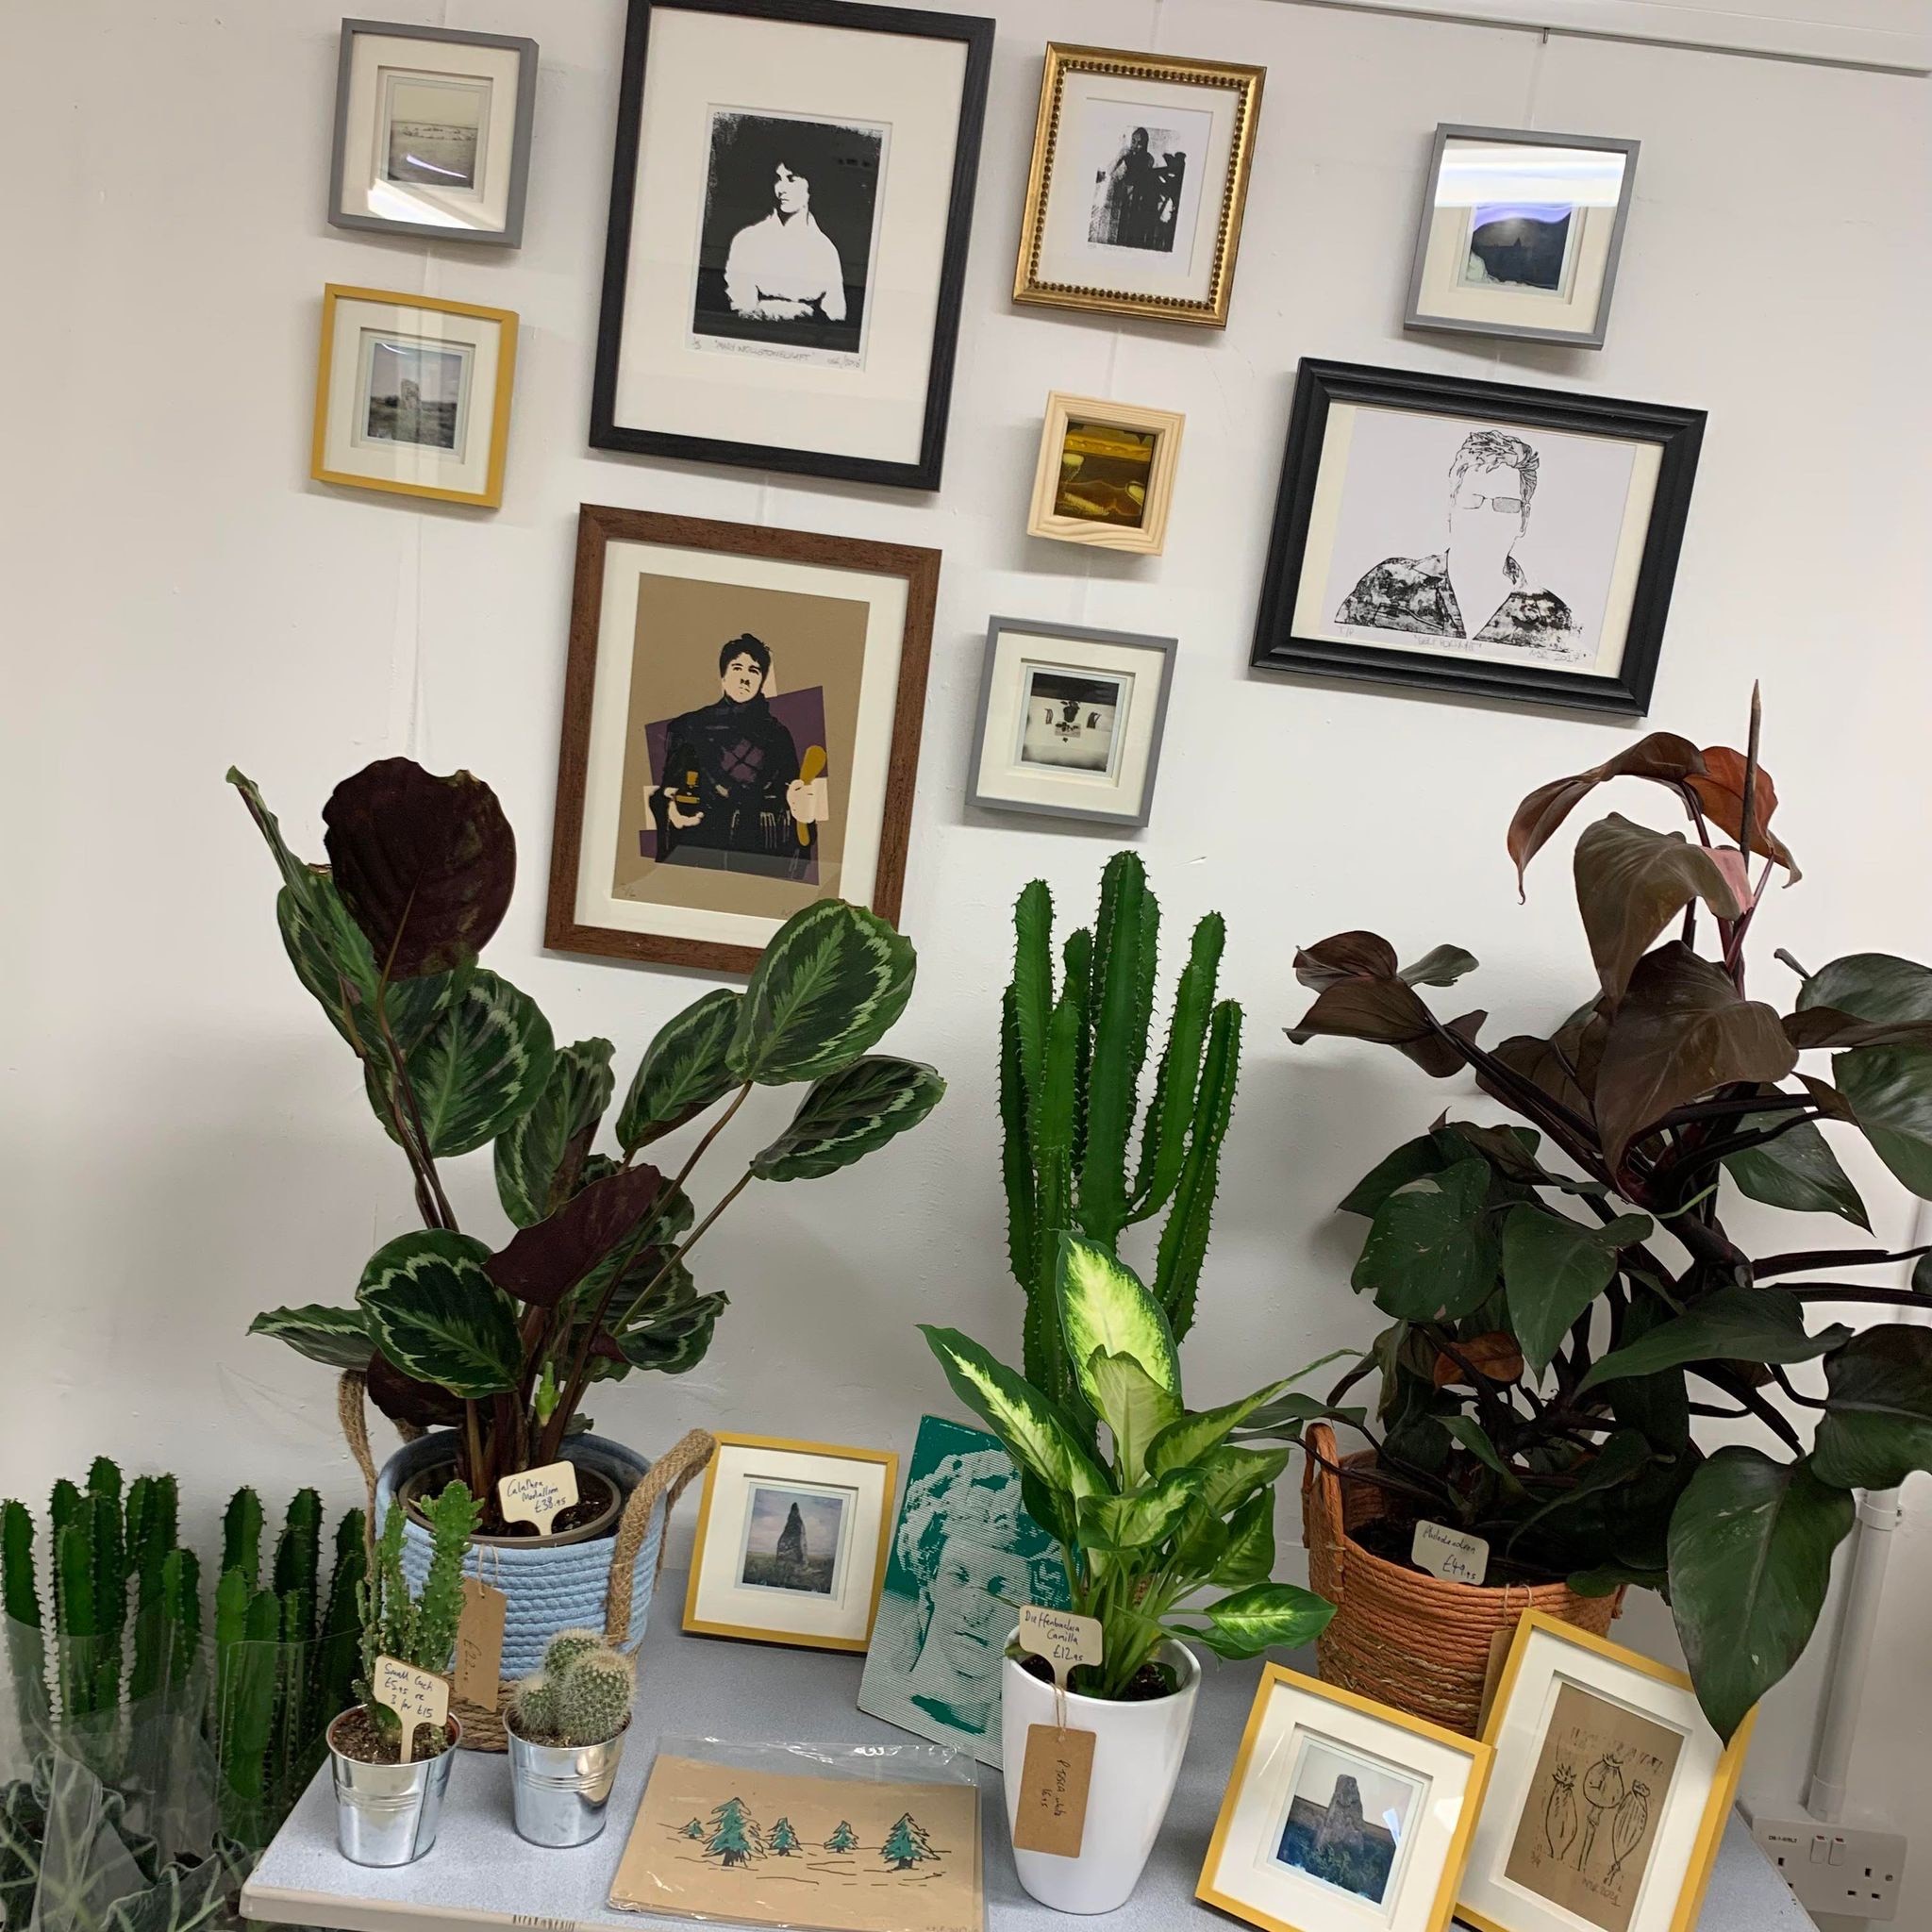 •	An arts bazaar featuring a collection of jewellery and plants is in store for people attending